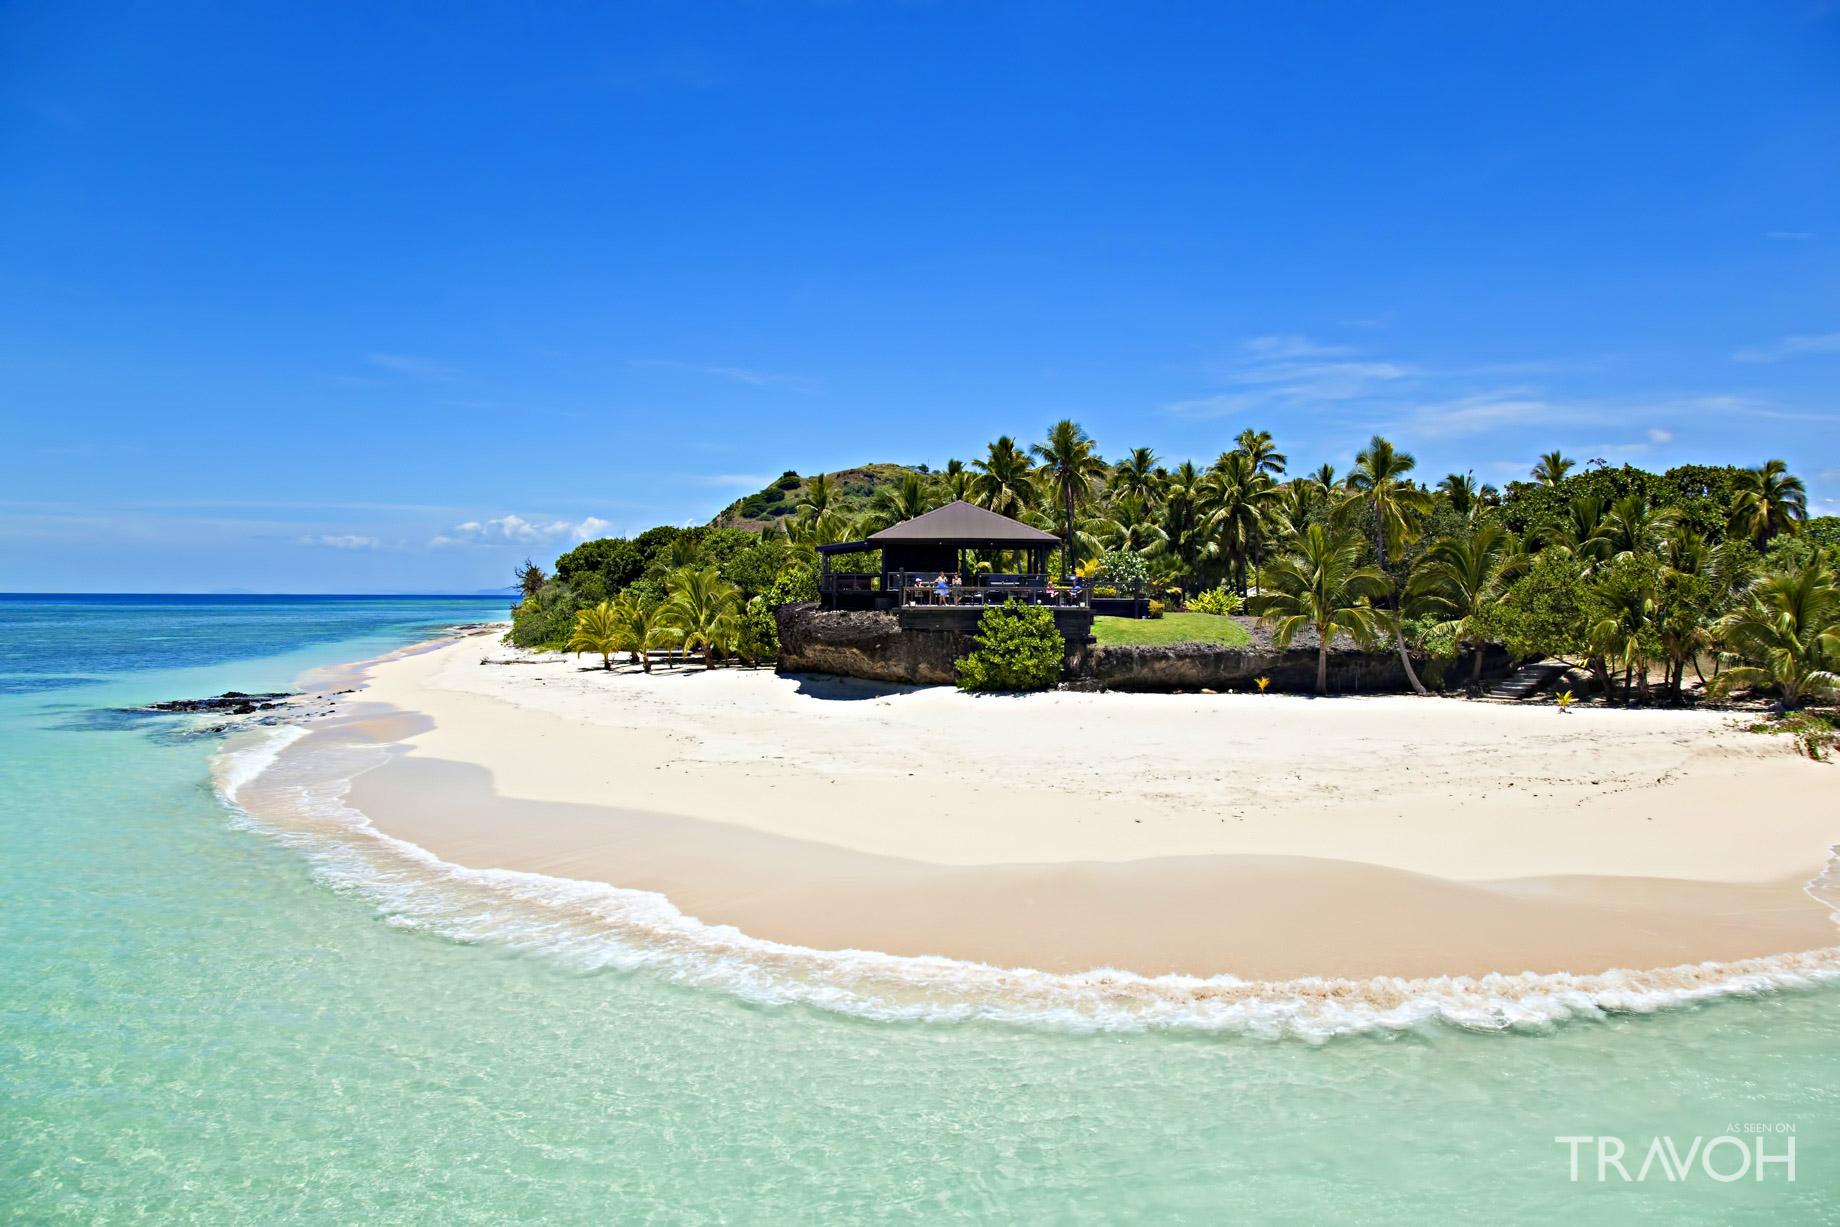 Vomo Island Resort - Exploring 10 of the Top Beach Locations on the Islands of Fiji